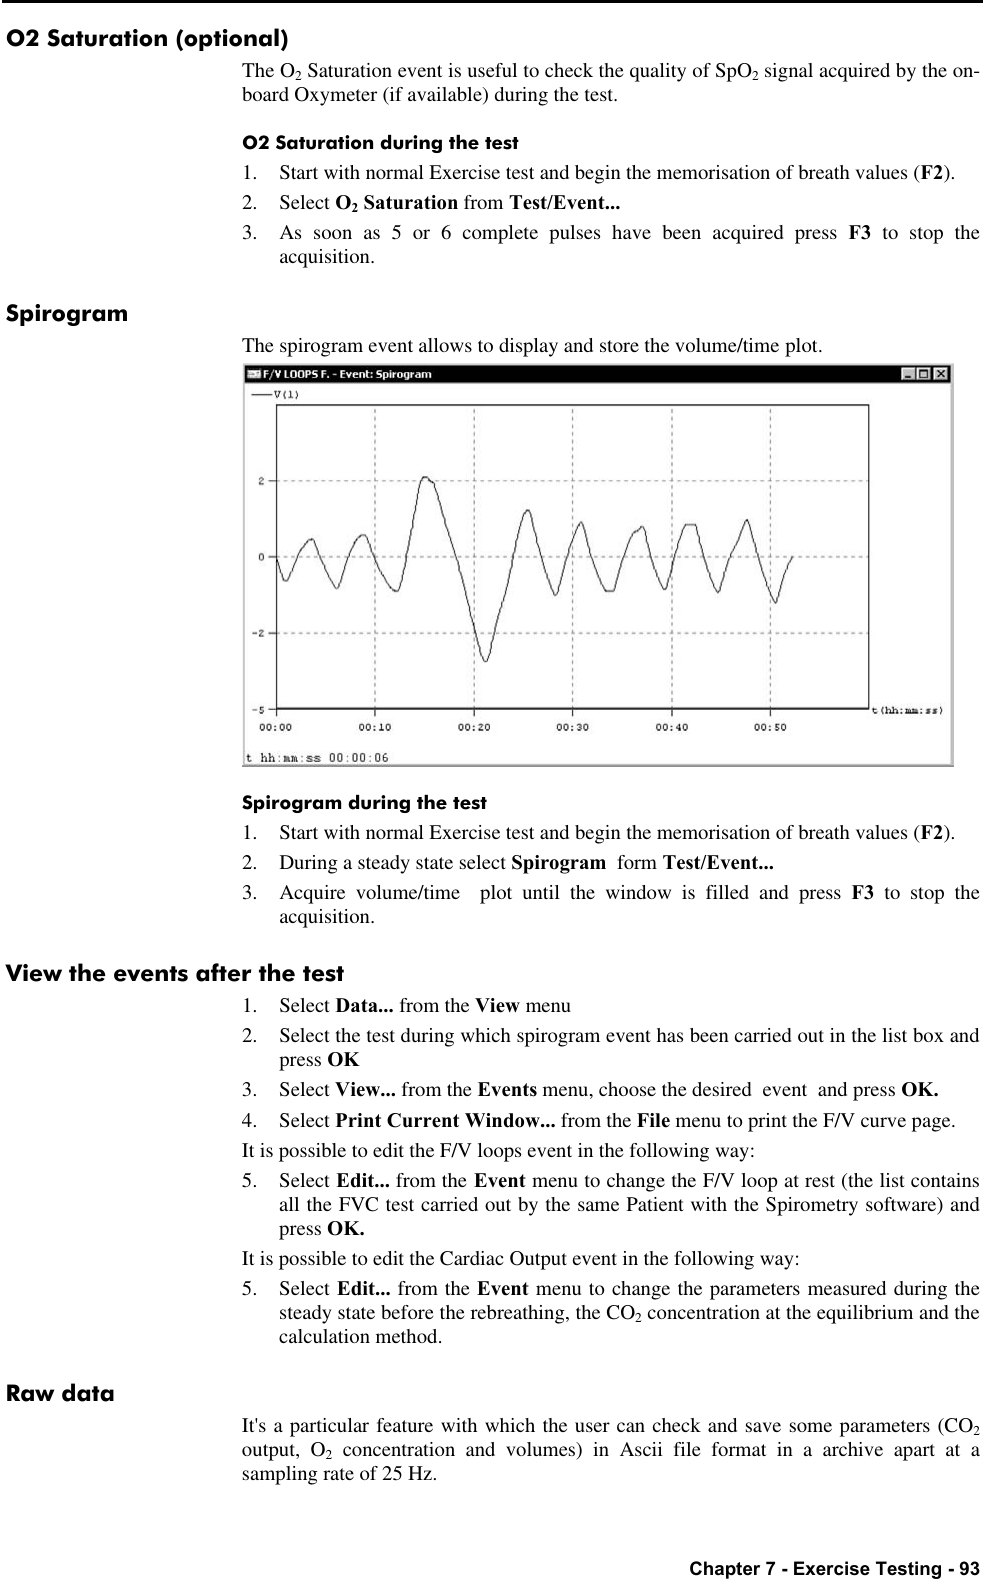   Chapter 7 - Exercise Testing - 93 O2 Saturation (optional) The O2 Saturation event is useful to check the quality of SpO2 signal acquired by the on-board Oxymeter (if available) during the test. O2 Saturation during the test 1. Start with normal Exercise test and begin the memorisation of breath values (F2). 2. Select O2 Saturation from Test/Event... 3. As soon as 5 or 6 complete pulses have been acquired press F3 to stop the acquisition. Spirogram The spirogram event allows to display and store the volume/time plot.  Spirogram during the test 1. Start with normal Exercise test and begin the memorisation of breath values (F2). 2. During a steady state select Spirogram  form Test/Event... 3. Acquire volume/time  plot until the window is filled and press F3  to stop the acquisition. View the events after the test 1. Select Data... from the View menu 2. Select the test during which spirogram event has been carried out in the list box and press OK 3. Select View... from the Events menu, choose the desired  event  and press OK. 4. Select Print Current Window... from the File menu to print the F/V curve page. It is possible to edit the F/V loops event in the following way: 5. Select Edit... from the Event menu to change the F/V loop at rest (the list contains all the FVC test carried out by the same Patient with the Spirometry software) and press OK. It is possible to edit the Cardiac Output event in the following way: 5. Select Edit... from the Event menu to change the parameters measured during the steady state before the rebreathing, the CO2 concentration at the equilibrium and the calculation method. Raw data It&apos;s a particular feature with which the user can check and save some parameters (CO2 output, O2 concentration and volumes) in Ascii file format in a archive apart at a sampling rate of 25 Hz. 